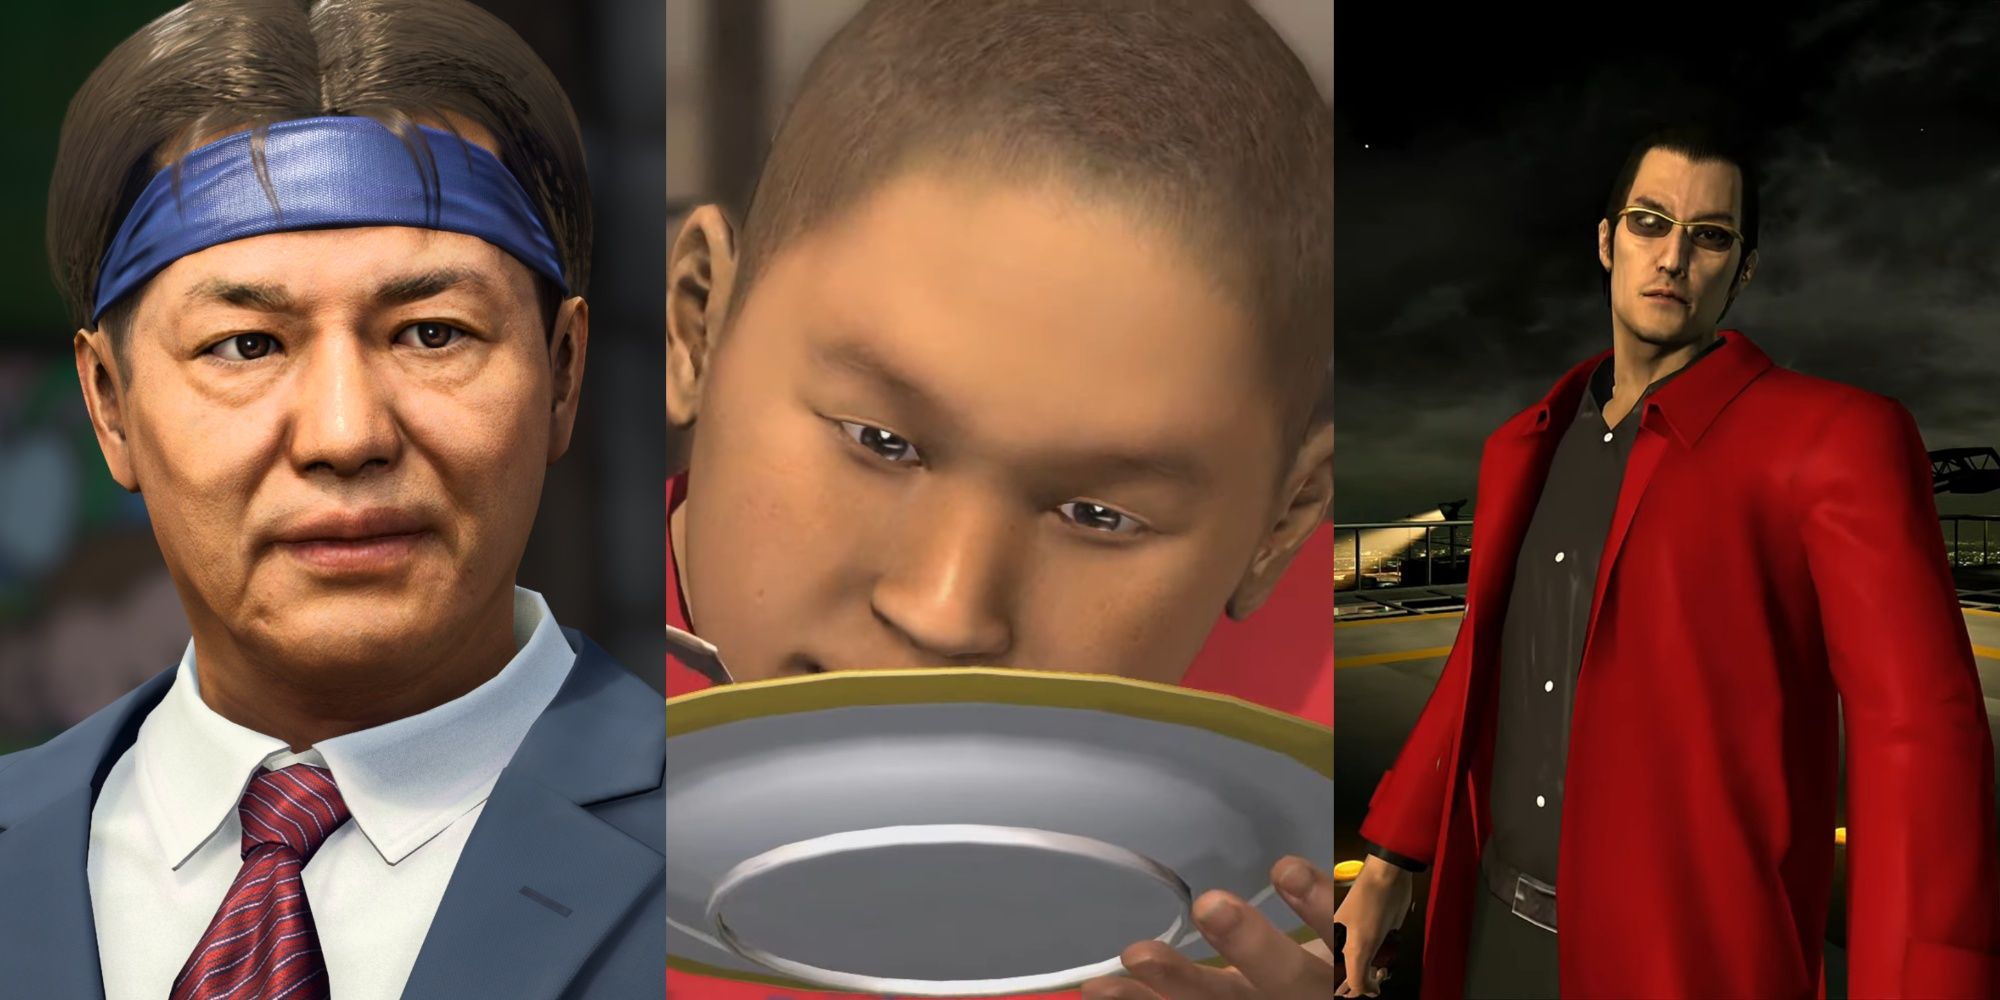 A collage showing Pocket Circuit Fighter from Like a Dragon Infinite Wealth, and Taichi and Kazuto Arase from Yakuza 3.